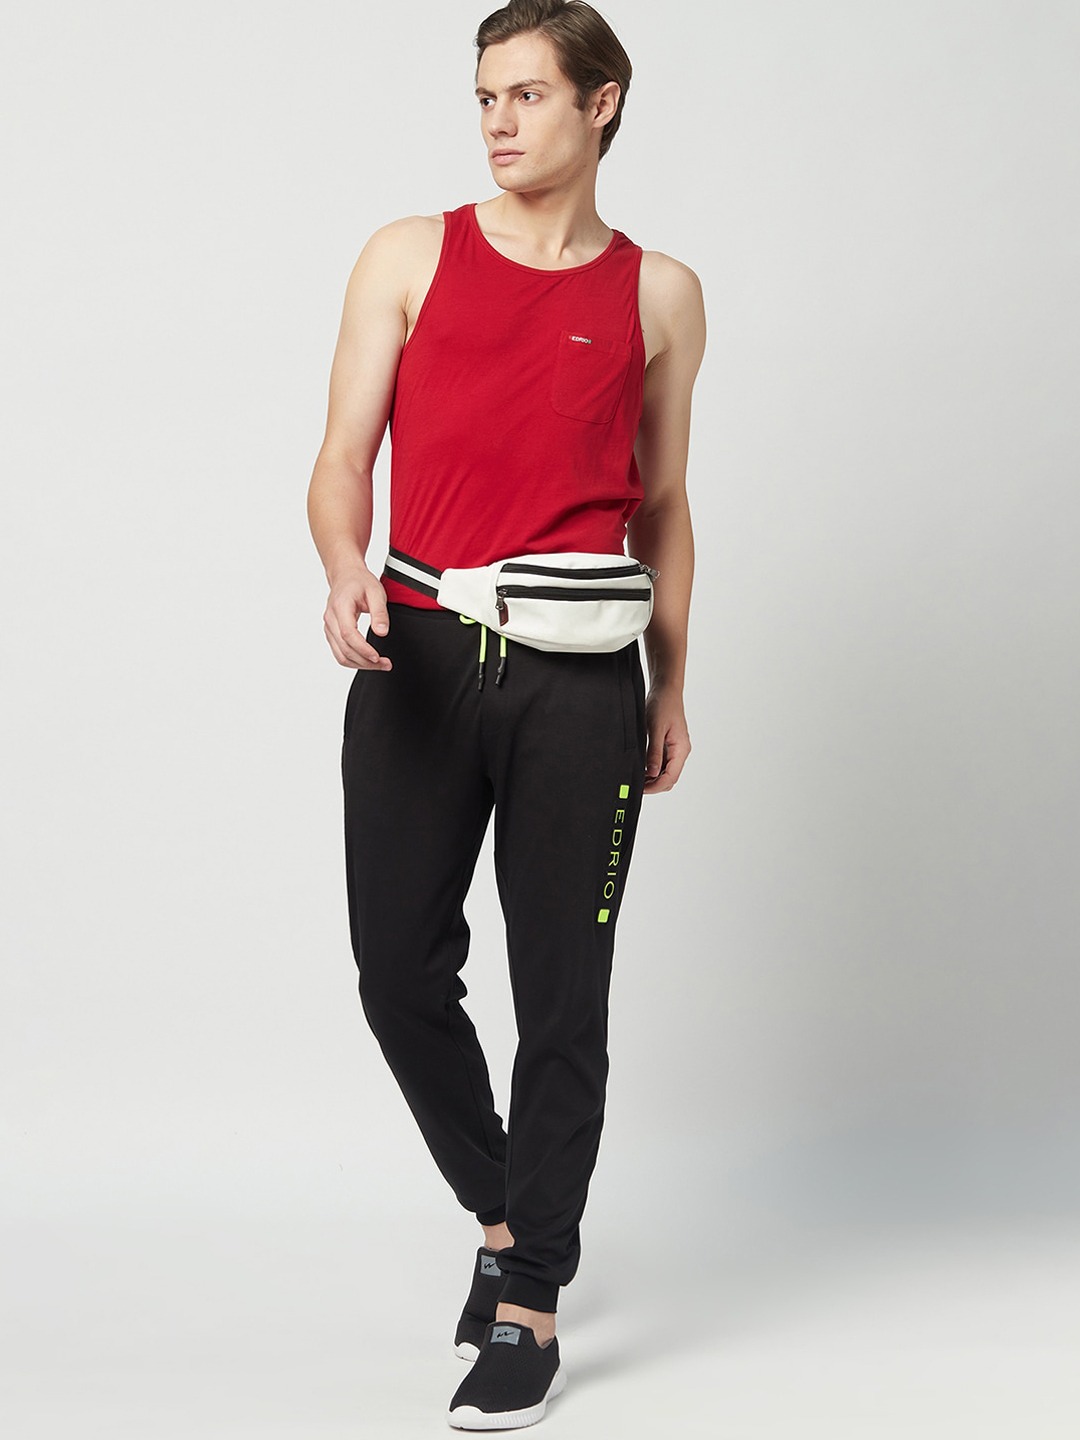 Clothing Innerwear Vests | EDRIO Men Red Solid Cotton Tank Vest SEDM1AQXX002S04 - ZB24990